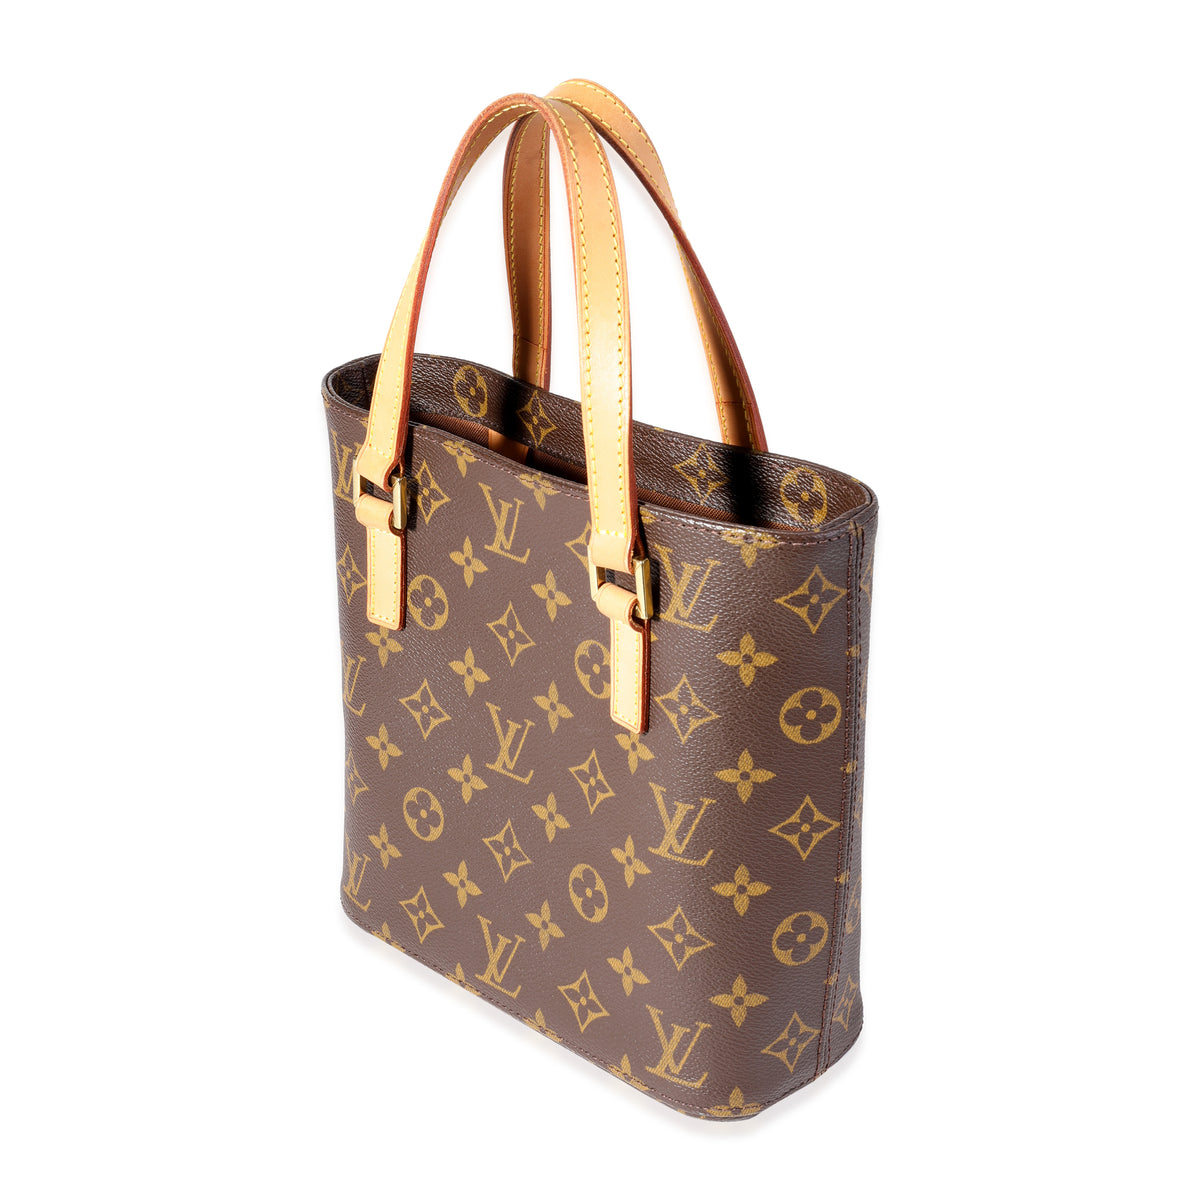 How to style the Louis Vuitton Vavin PM bag 